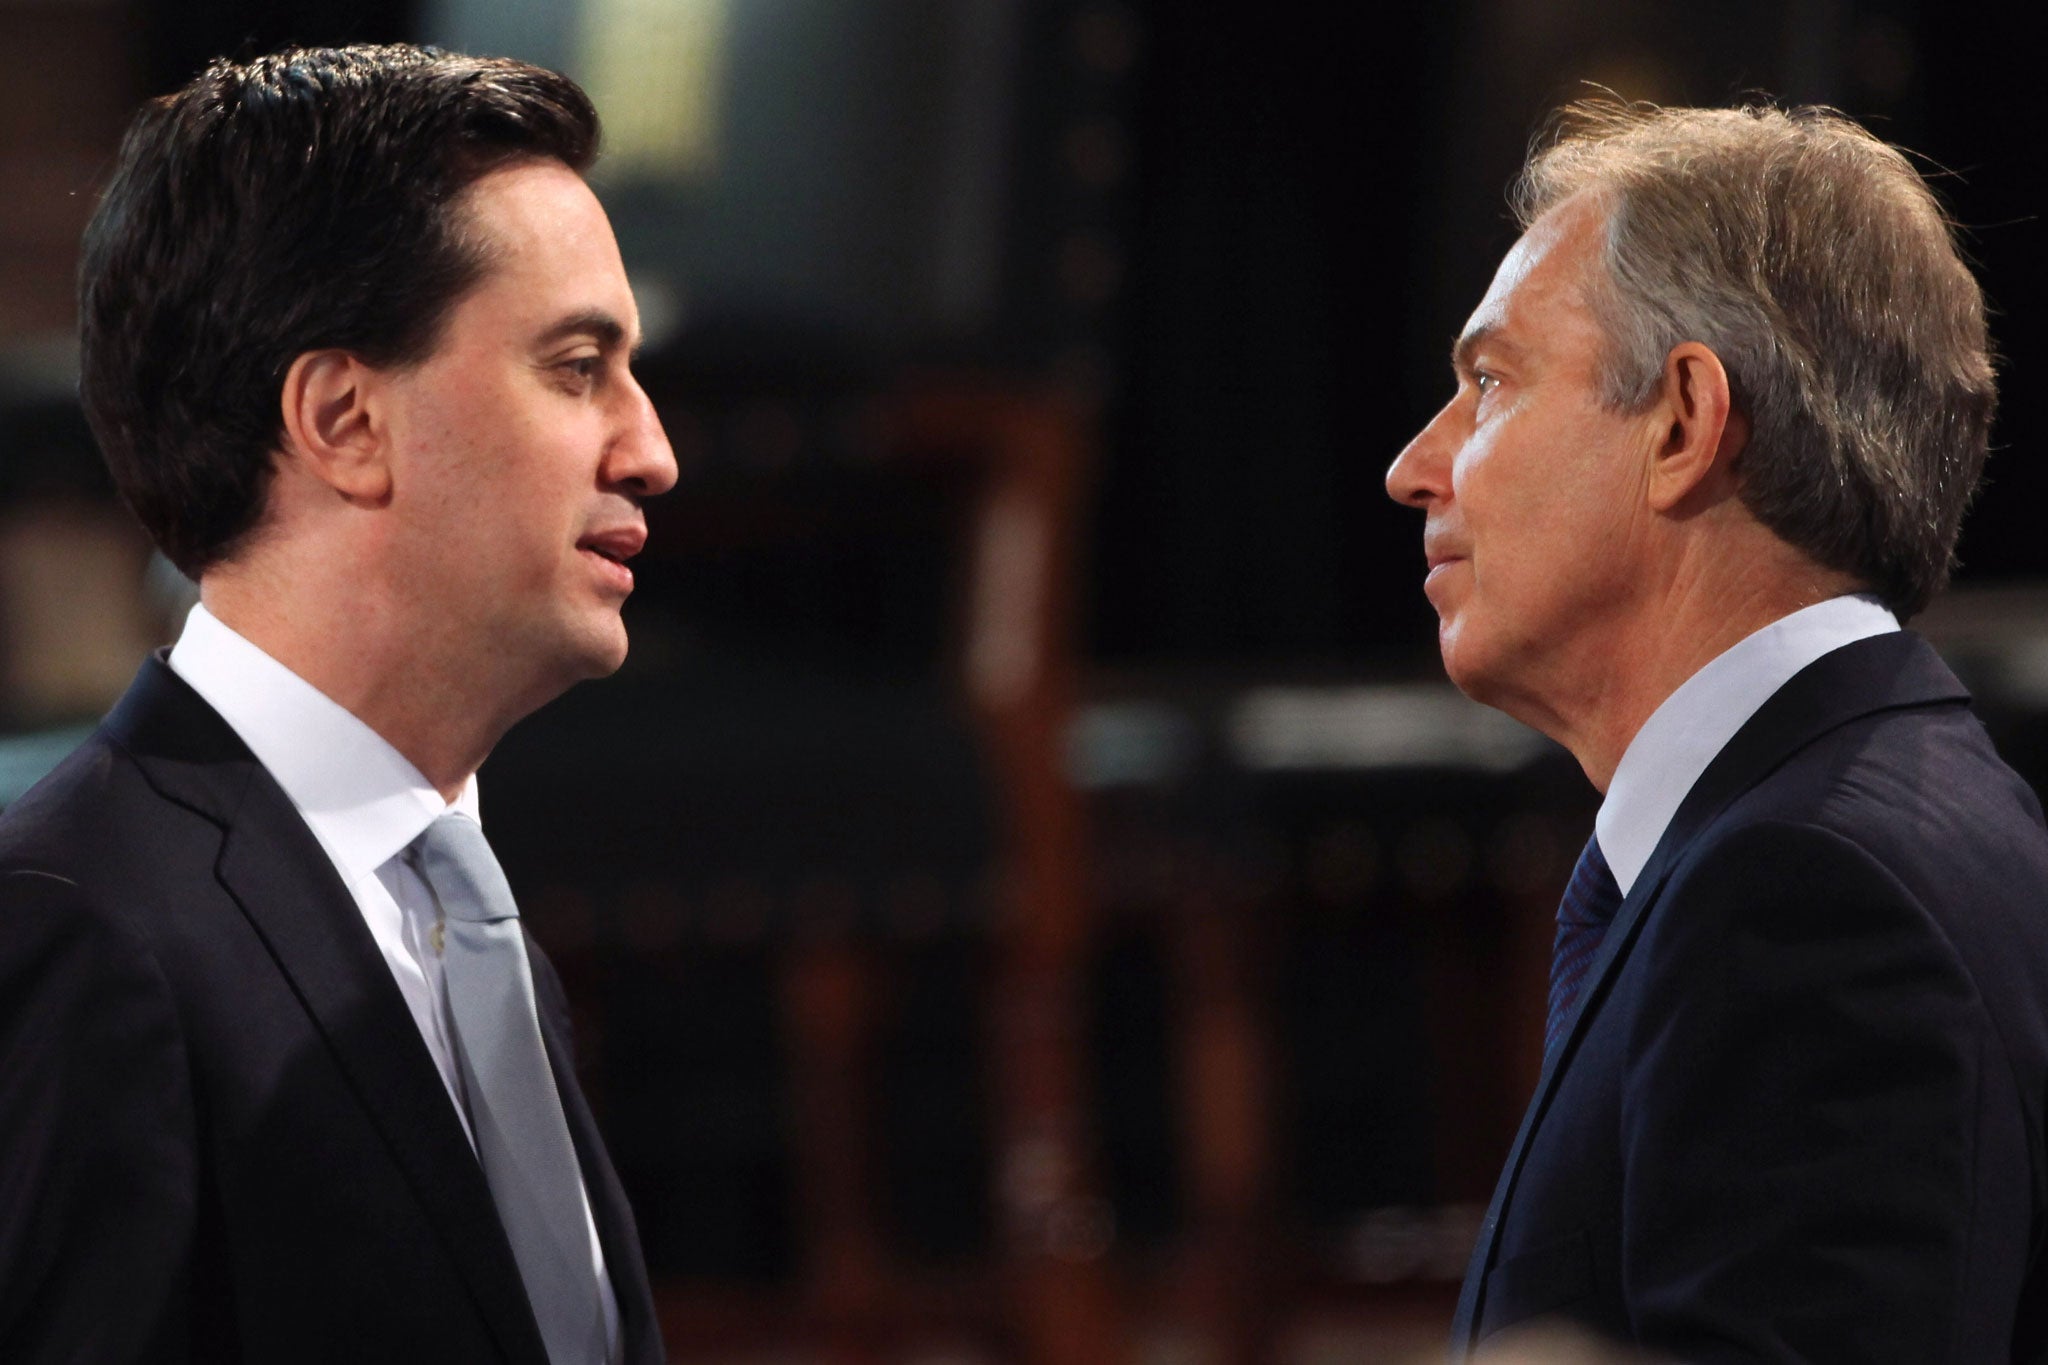 Tony Blair makes a rare supportive intervention for Ed Miliband today